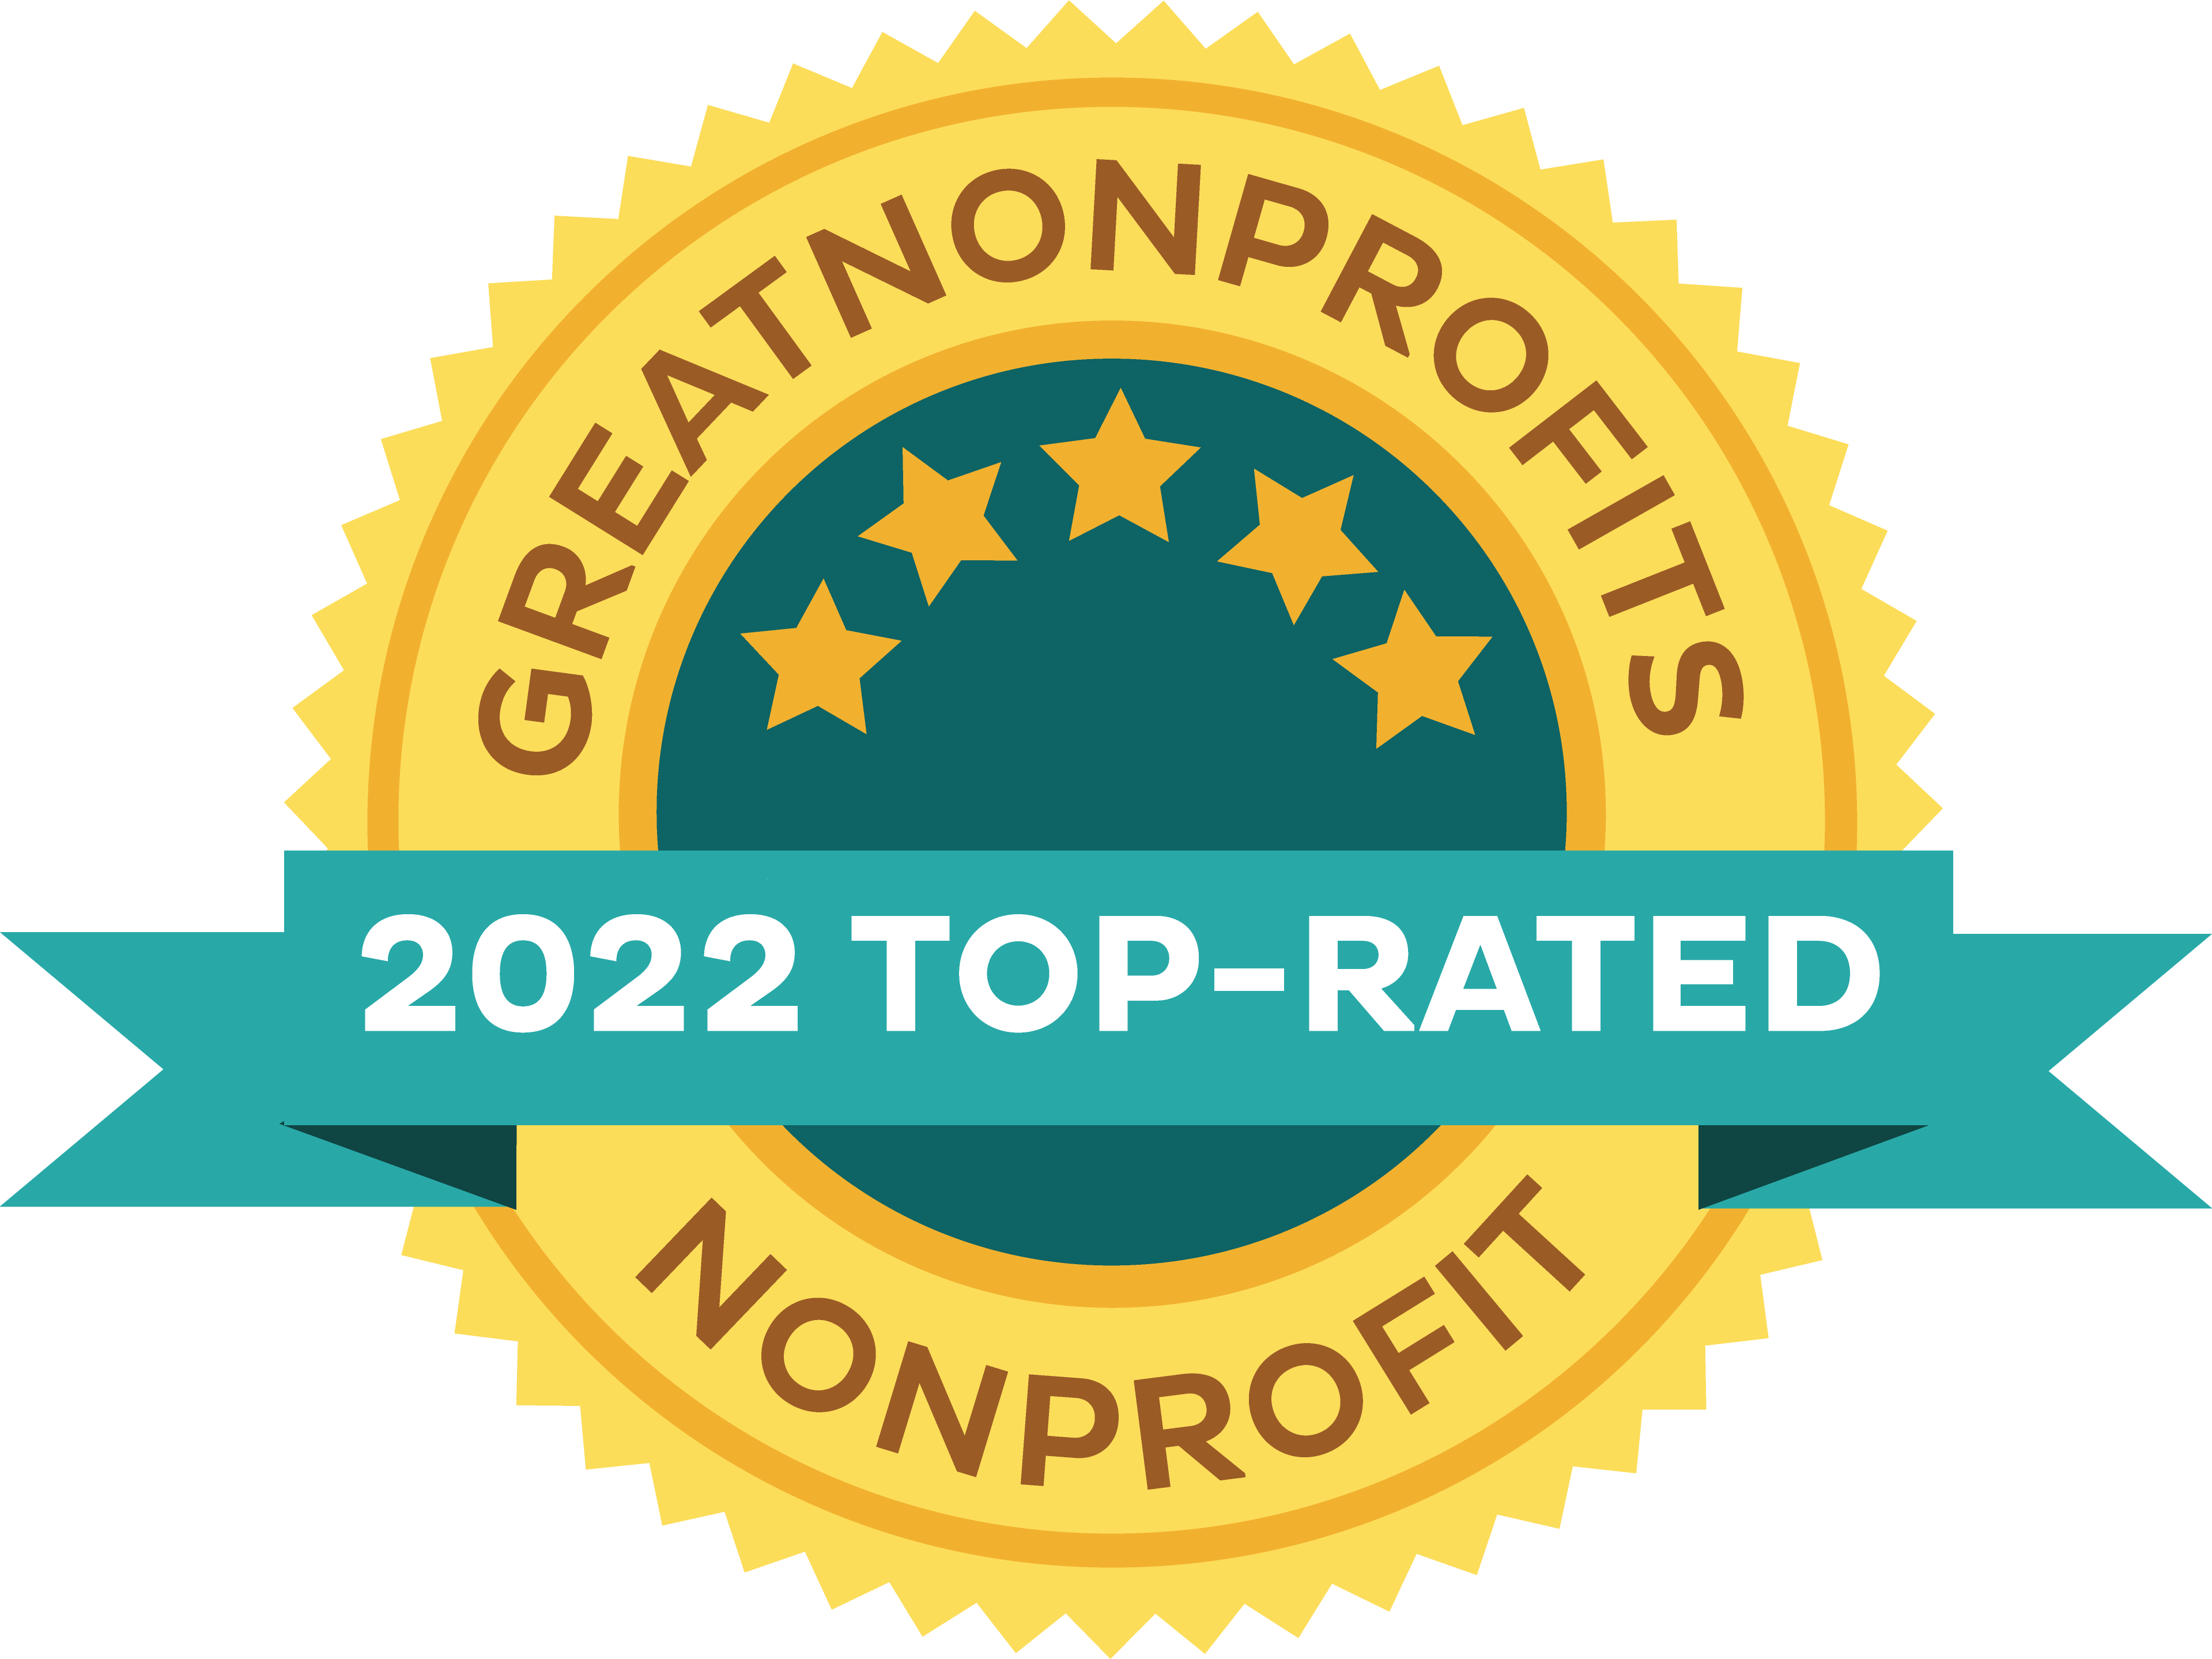 2022 Top-Rated Award from GreatNonprofits